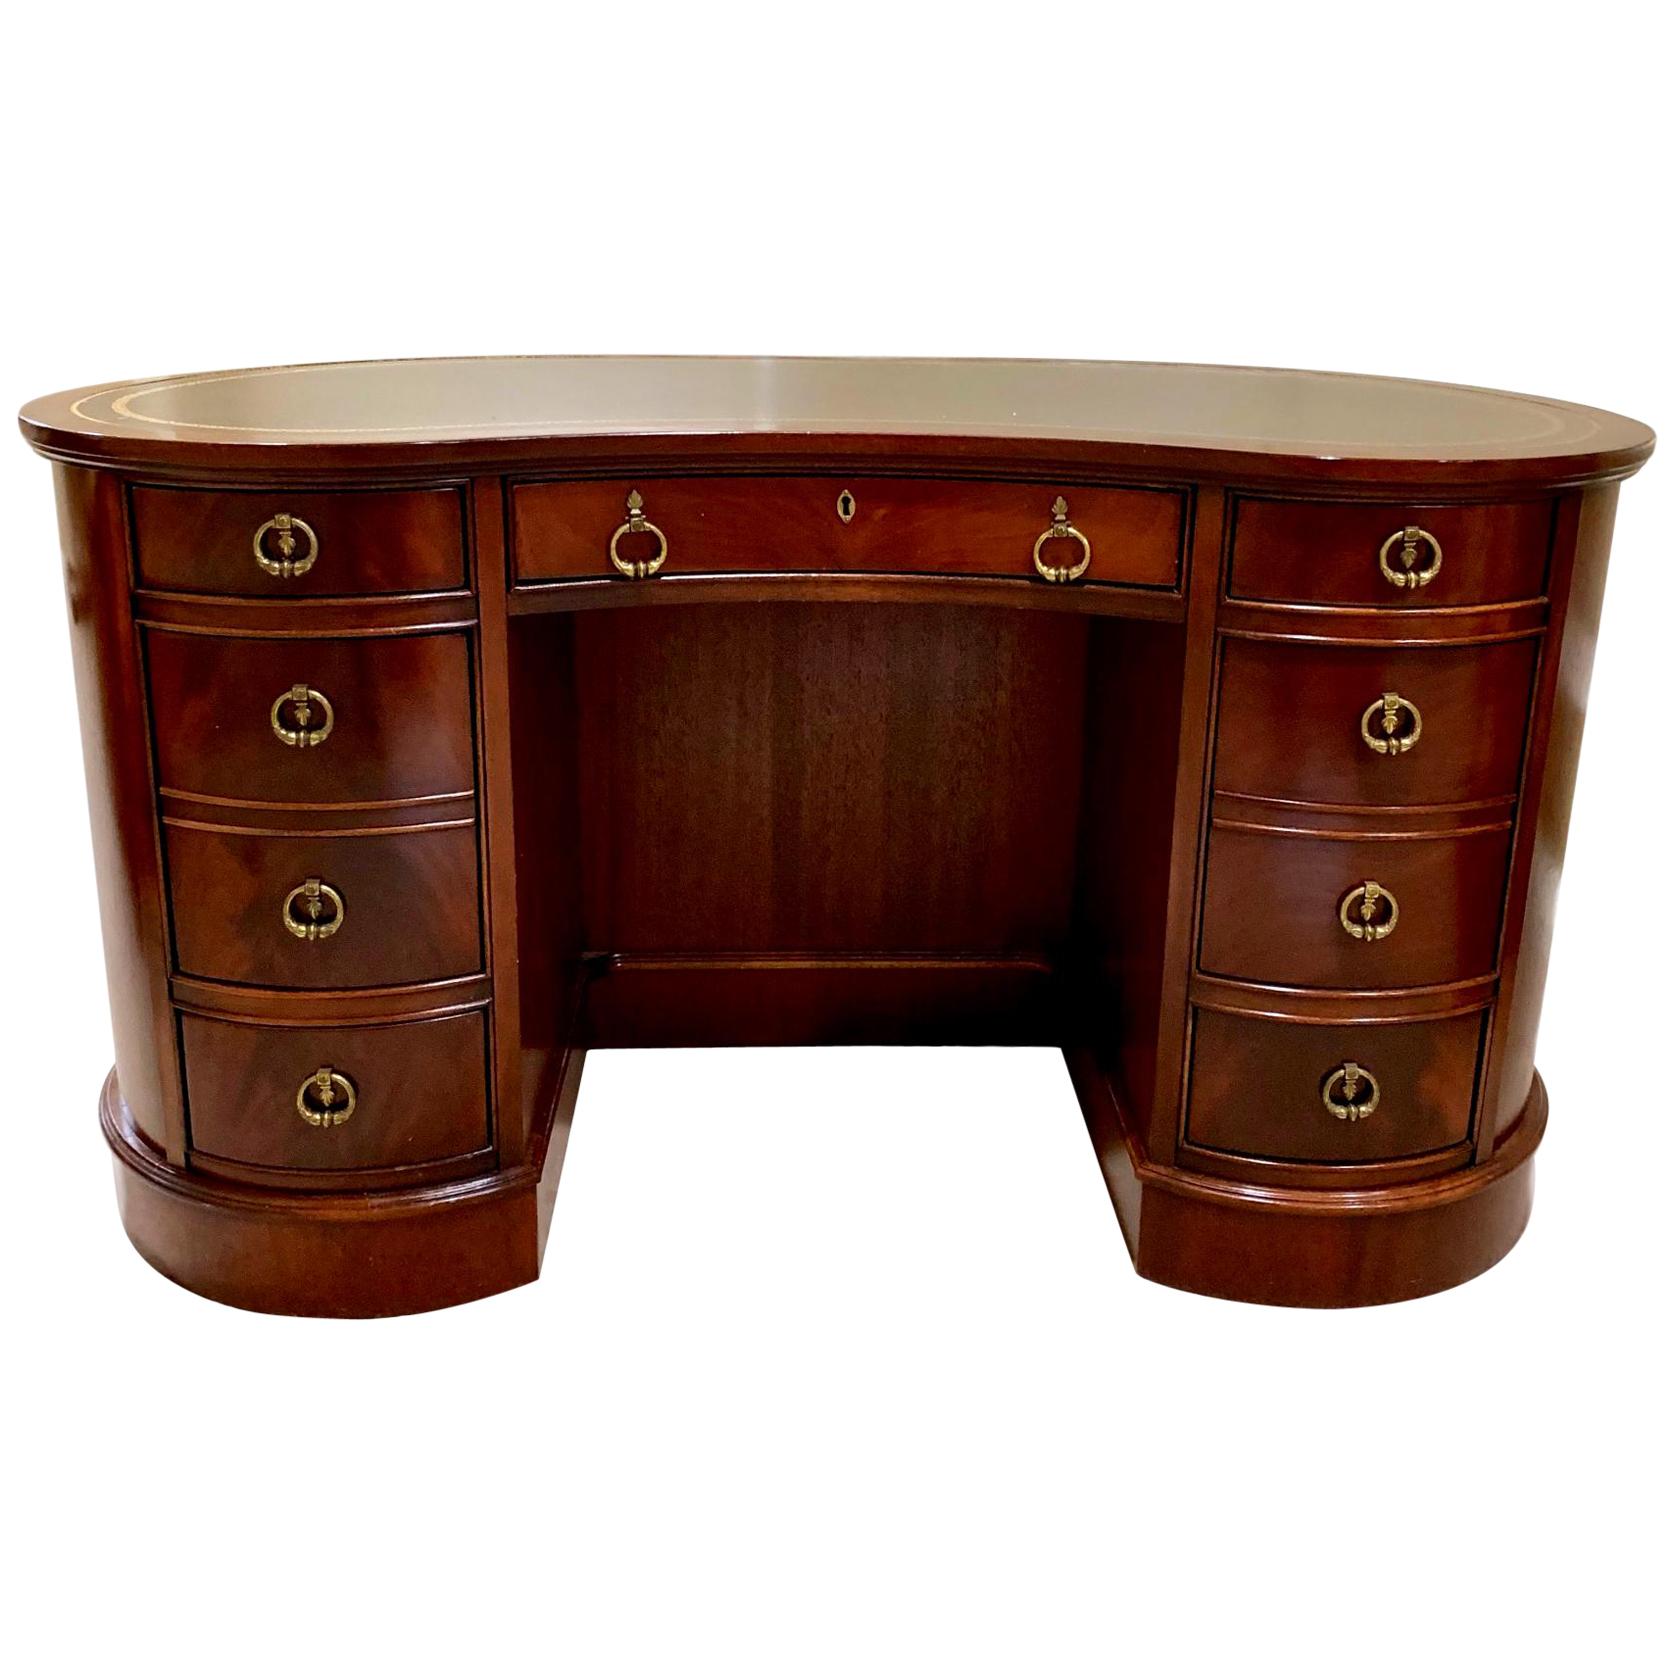 Baker Desk with Leather Top